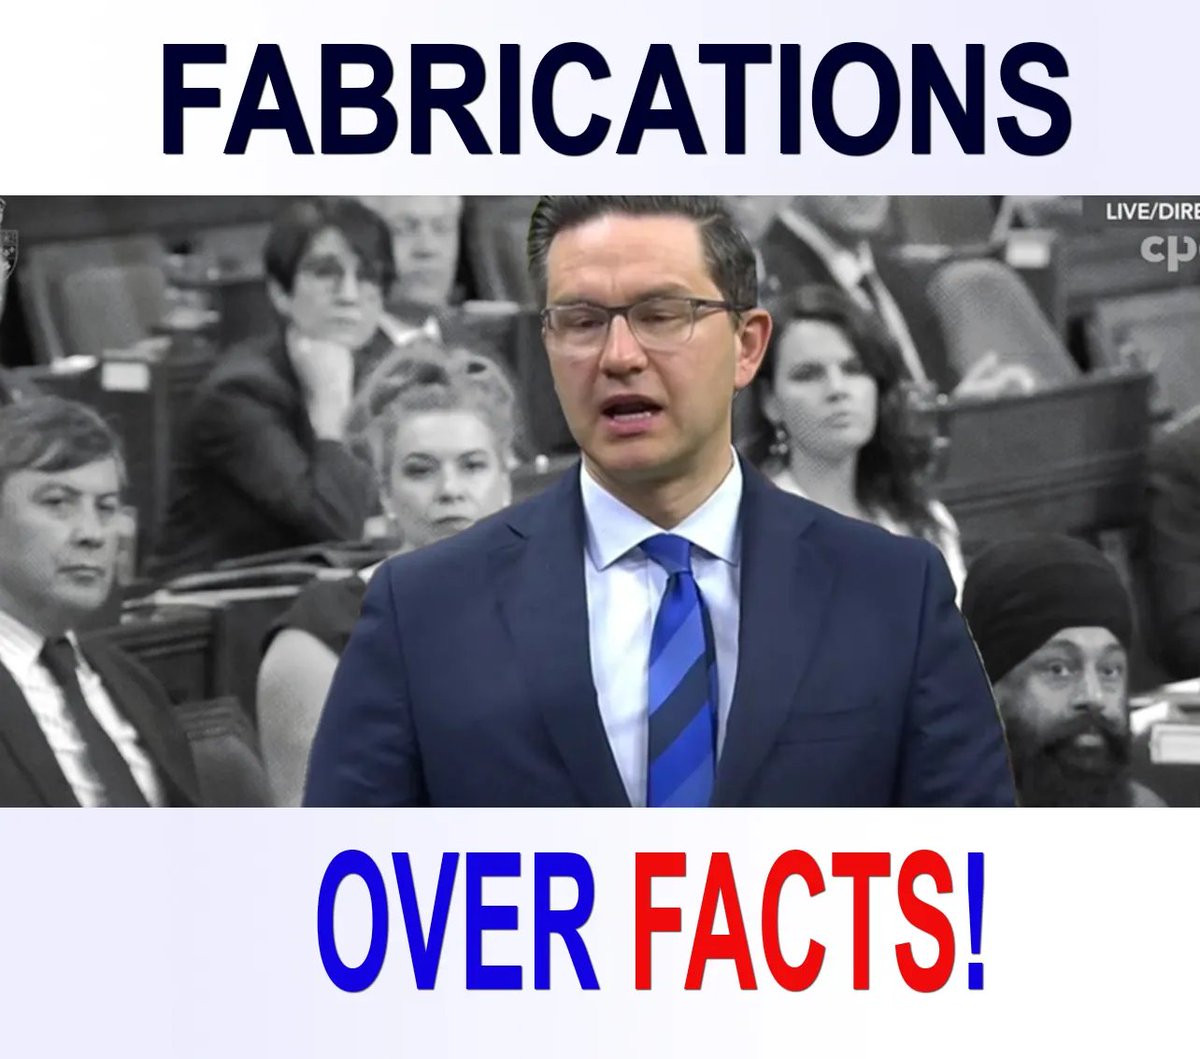 Things Pierre Poilievre won't tell you; I'll go first. Today July 1, 2023 average pump price of gas across Canada, even after carbon tax increase factored in is 22% LOWER than Canada Day 2022 .. because pump prices are influence by supply and demand disruptions, not a carbon tax.